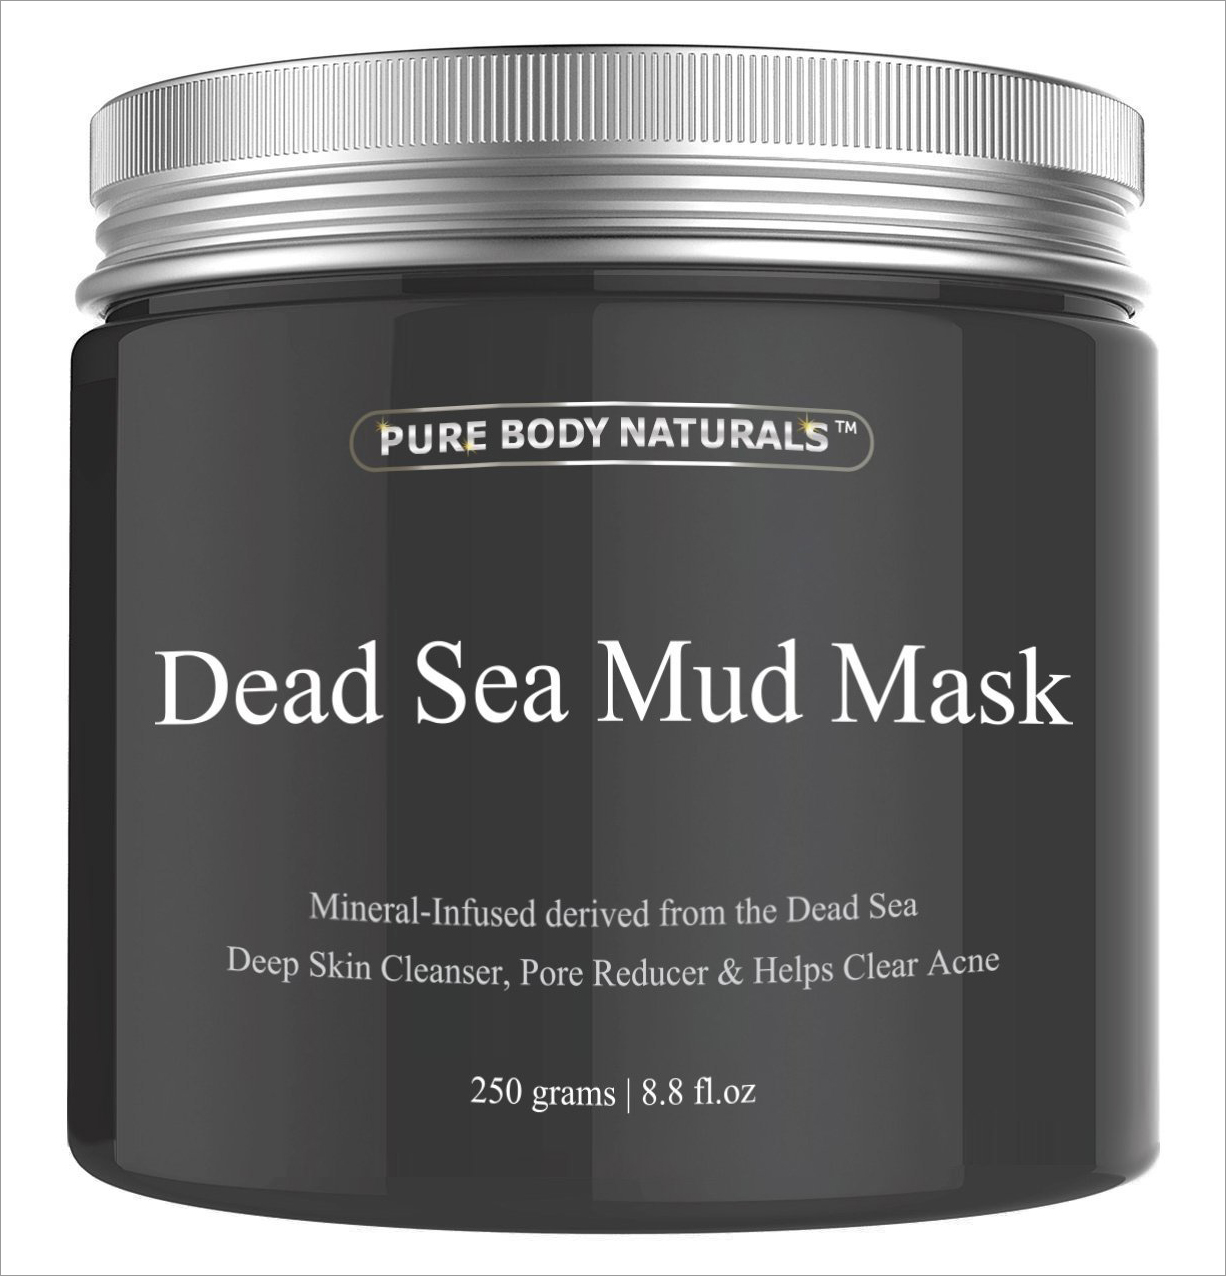 PURE BODY NATURALS Dead Sea Mud Mask - #1 Amazon Best Seller in the Body Mud category, but it works great for reducing acne!